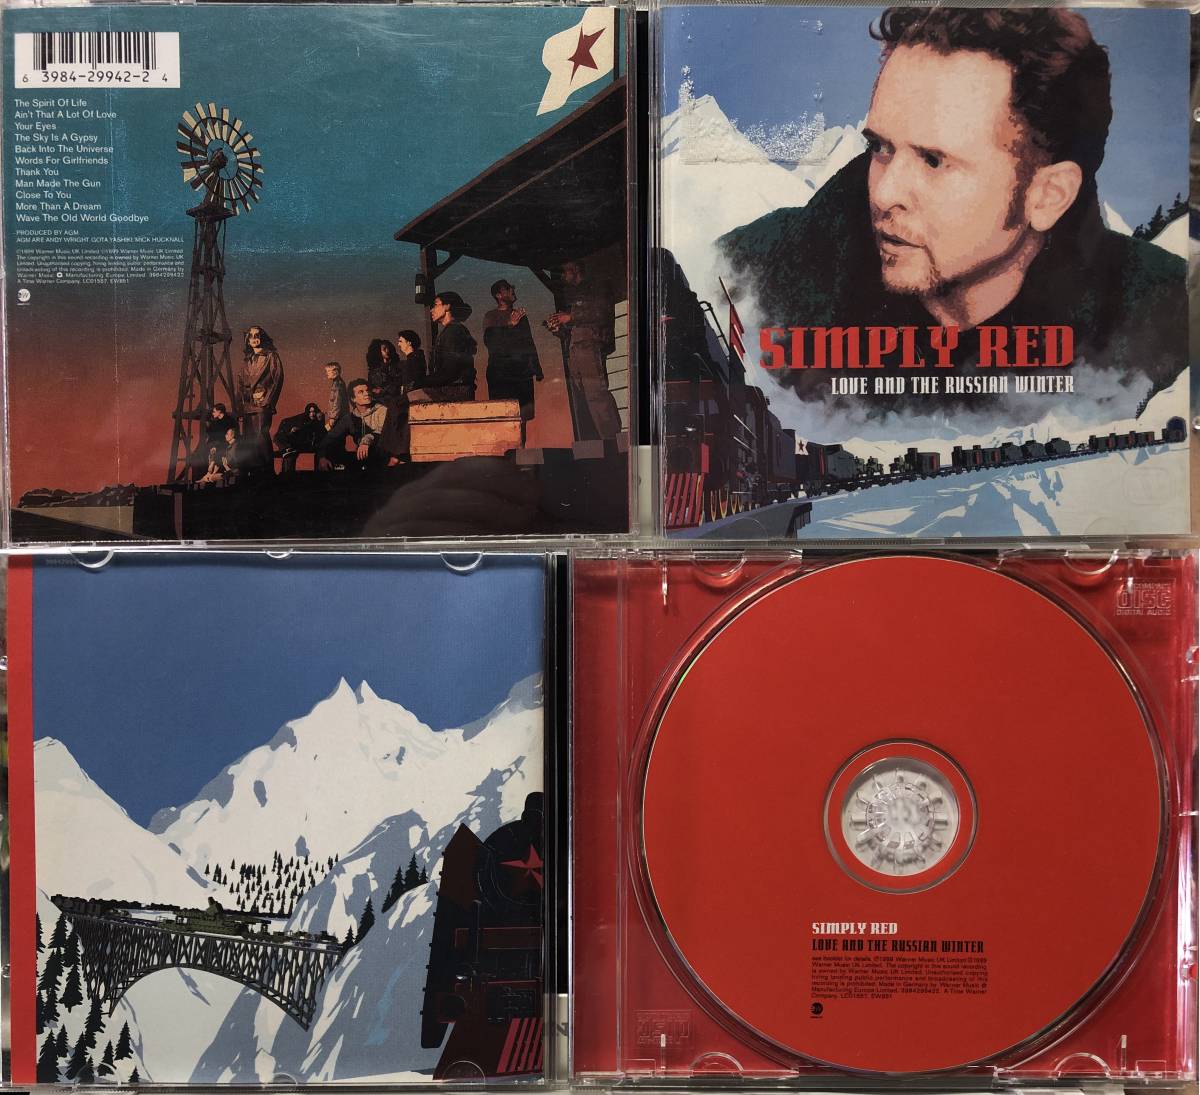 CD6枚 SIMPLY RED LIFE,MEN AND WOMEN,LOVE AND THE RUSSIAN WINTER,A NEW FLAME,HOME,BLUE_1999 GERMANY